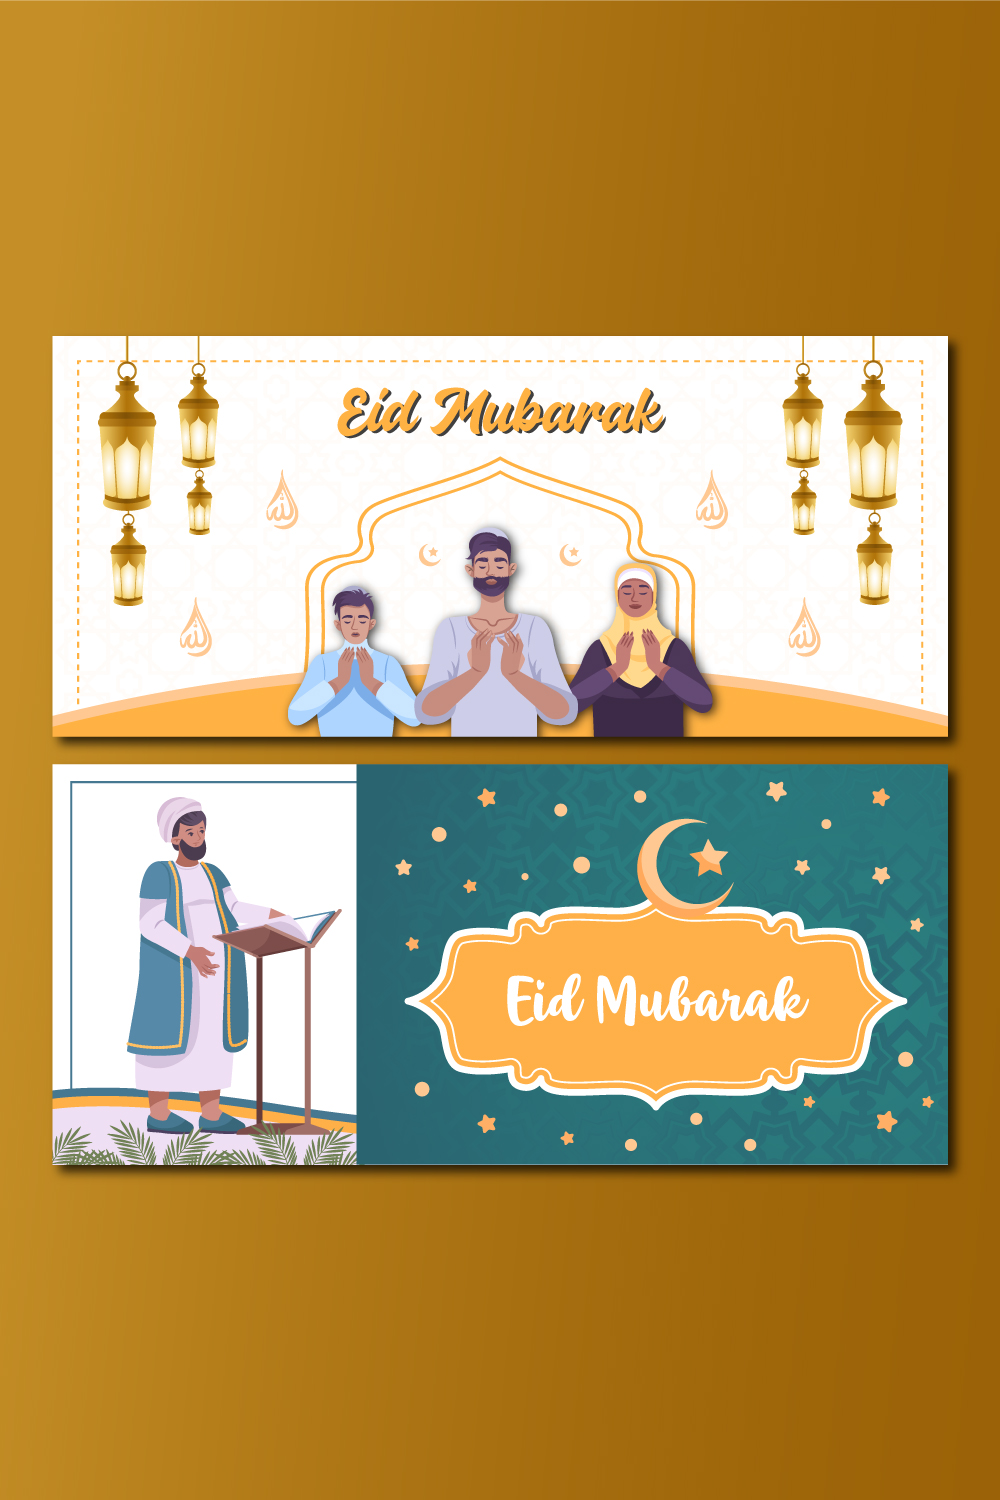 Eid mubarak wishes banner or social media facebook cover design with arabic decoration pinterest preview image.